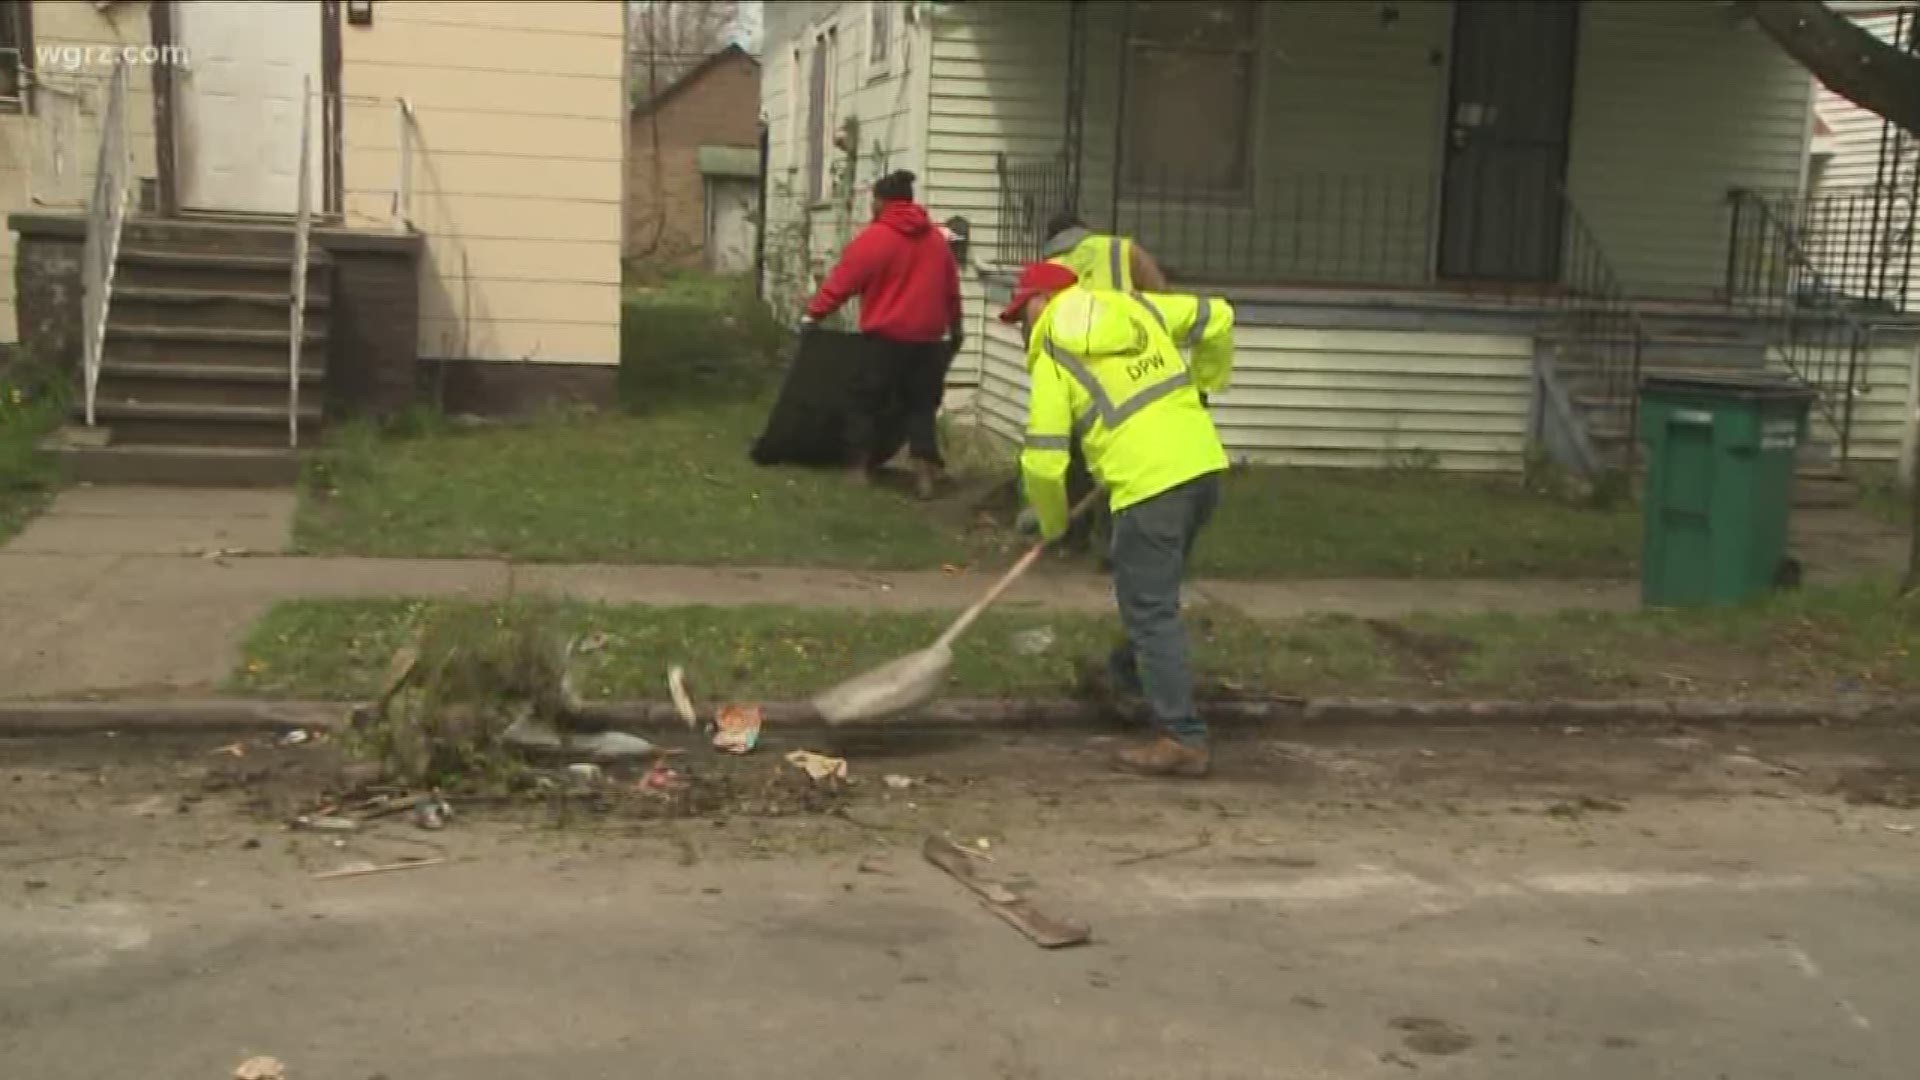 The city is partnering with various groups to address blight and quality of life issues.